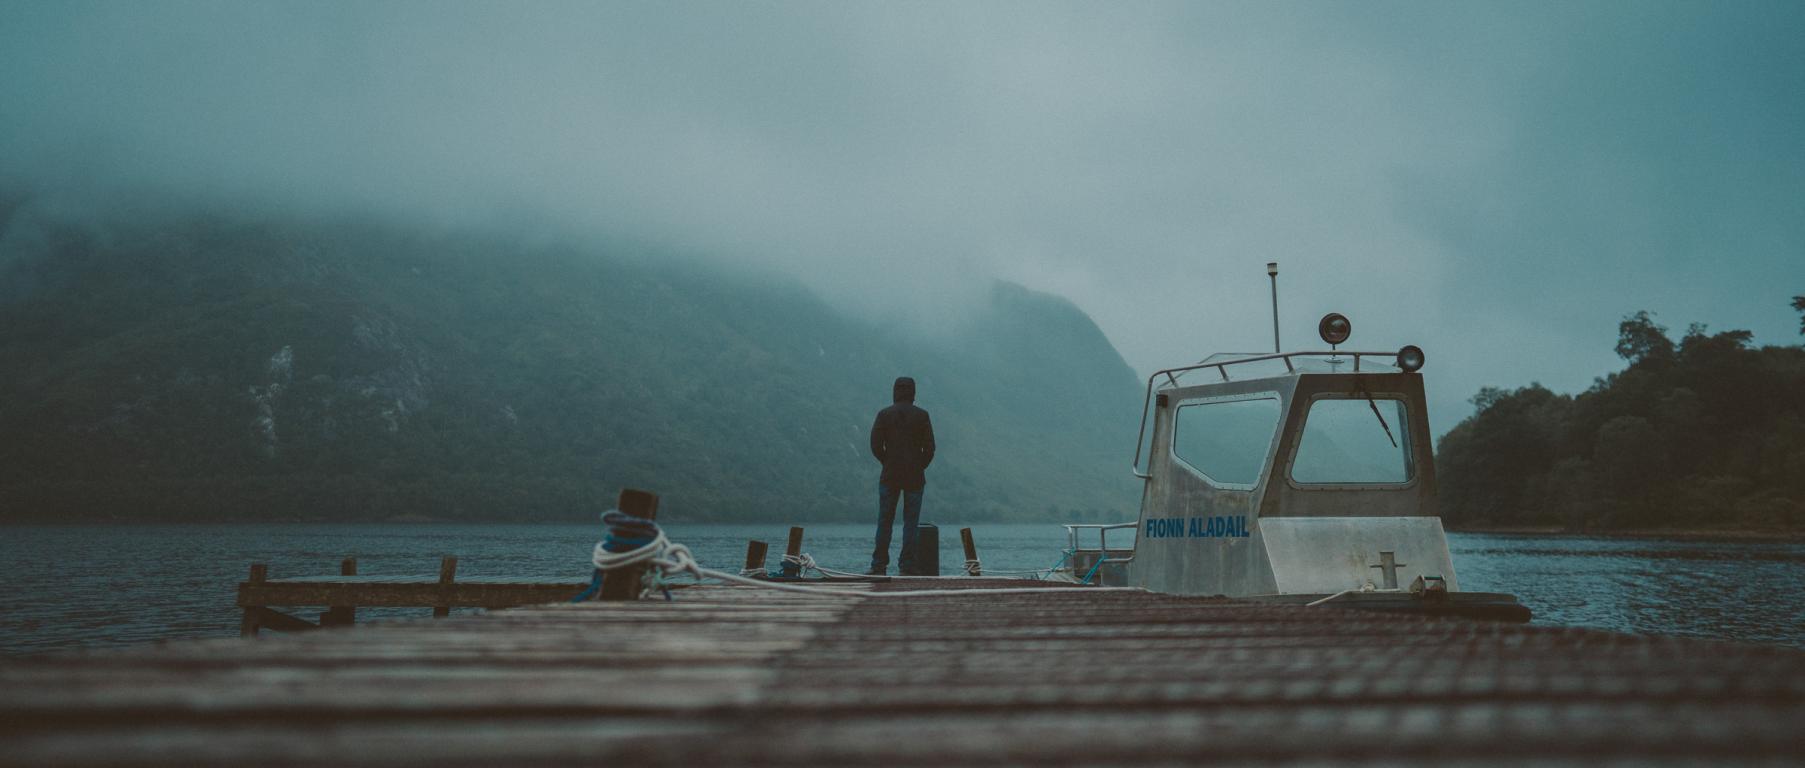 Man stands on pier with boat beside him looking out to water which is heavily covered in fog.